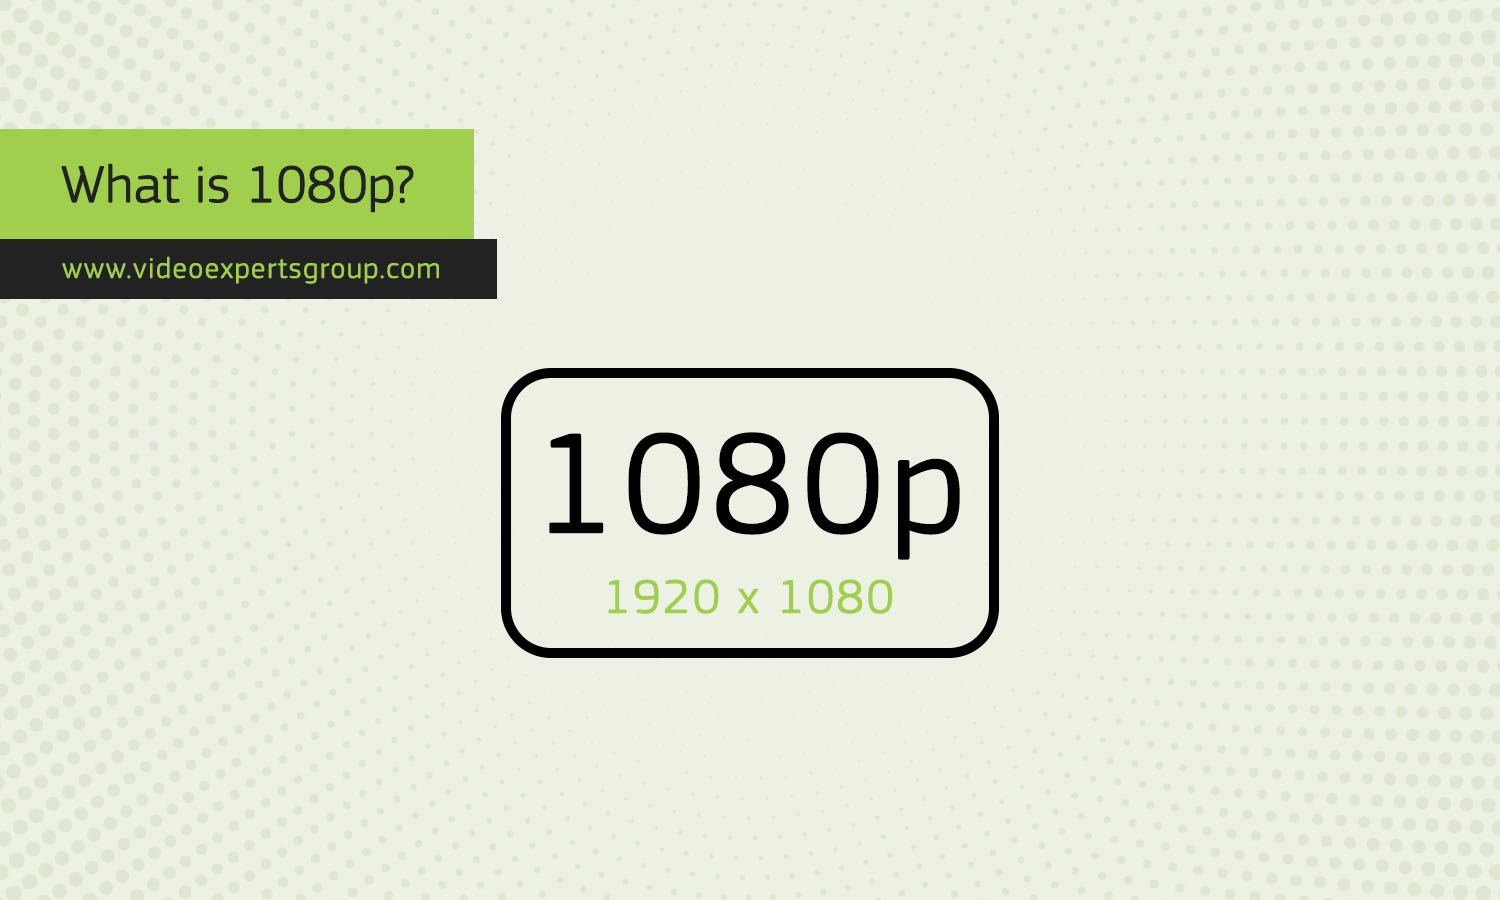 What is 1080p?